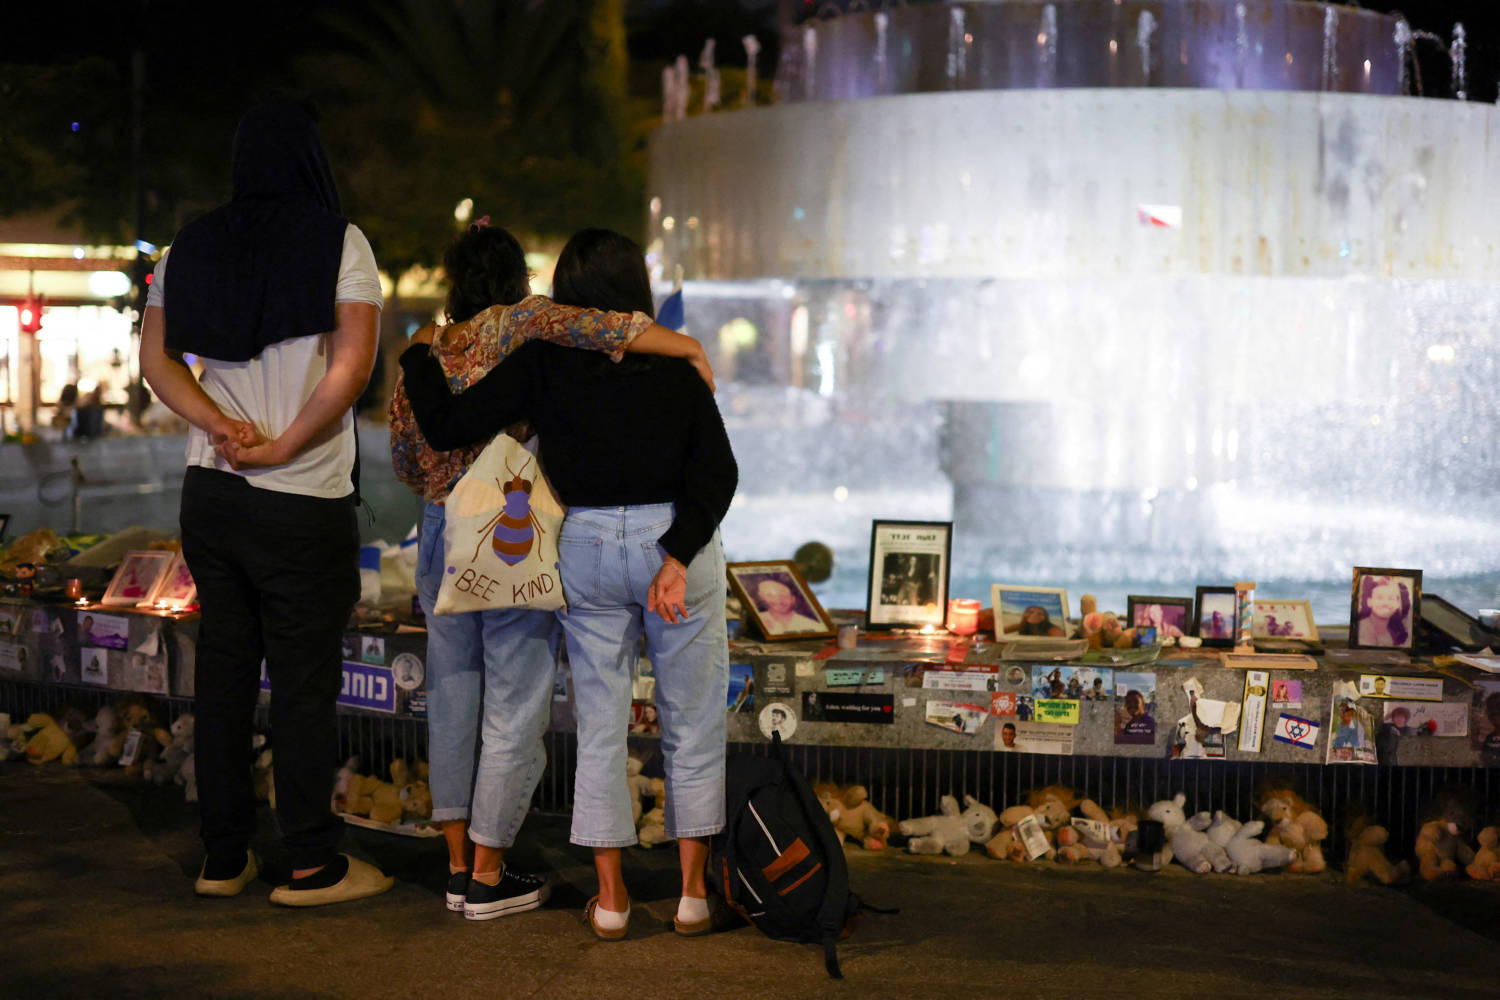 People Stand Next To Memorabilia And Pictures Of The Hostages Kidnapped In The Deadly October 7 Attack On Israel By The Palestinian Islamist Group Hamas From Gaza, At Dizengoff Square In Tel Aviv